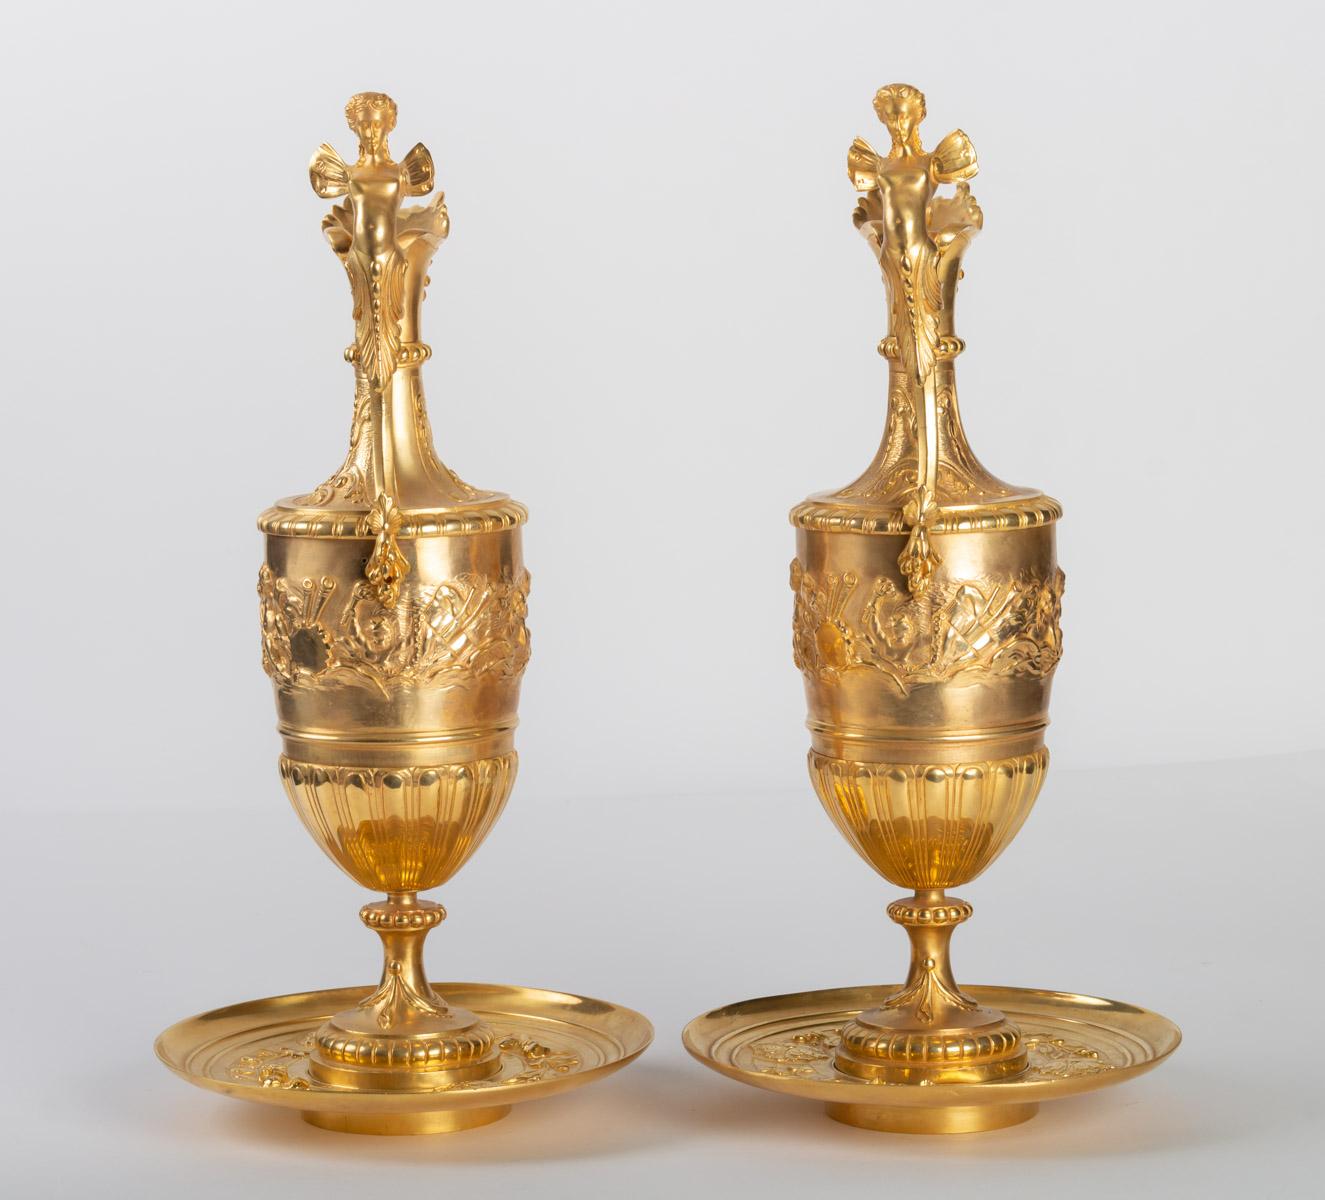 Ewers in gilt and chiseled bronze, 19th century, Napoleon III period

Measures: H 42 cm, D 20 cm.